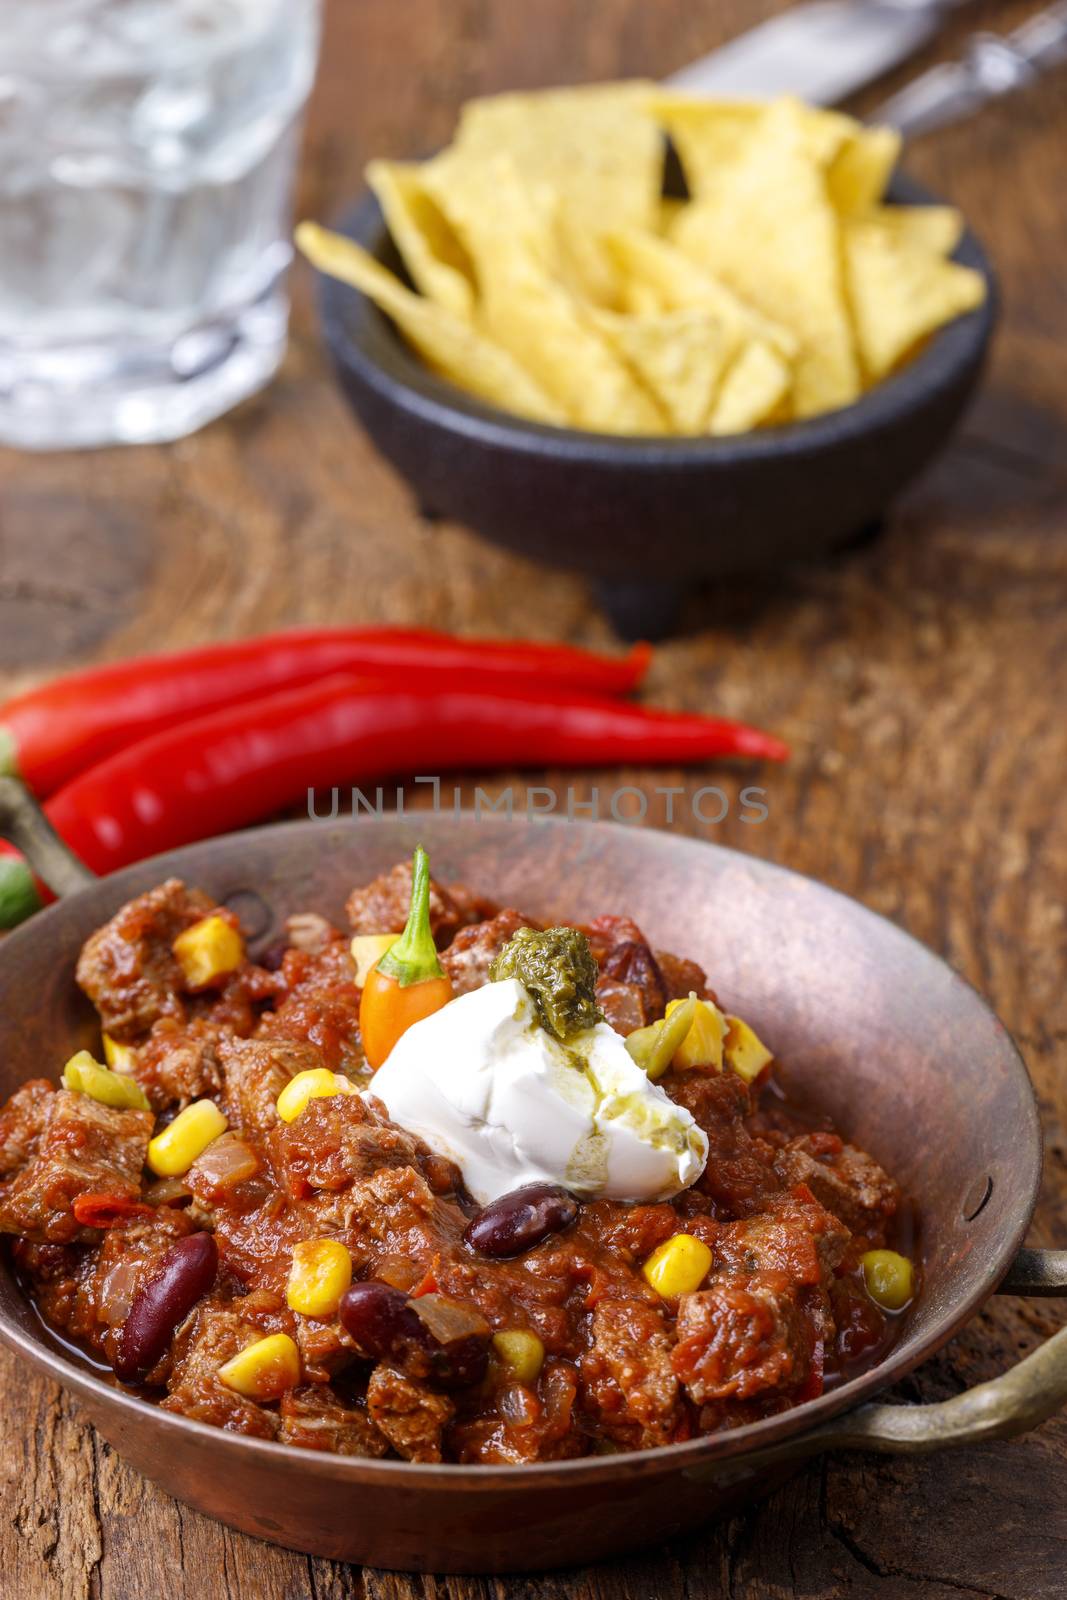 chili con carne on wood by bernjuer